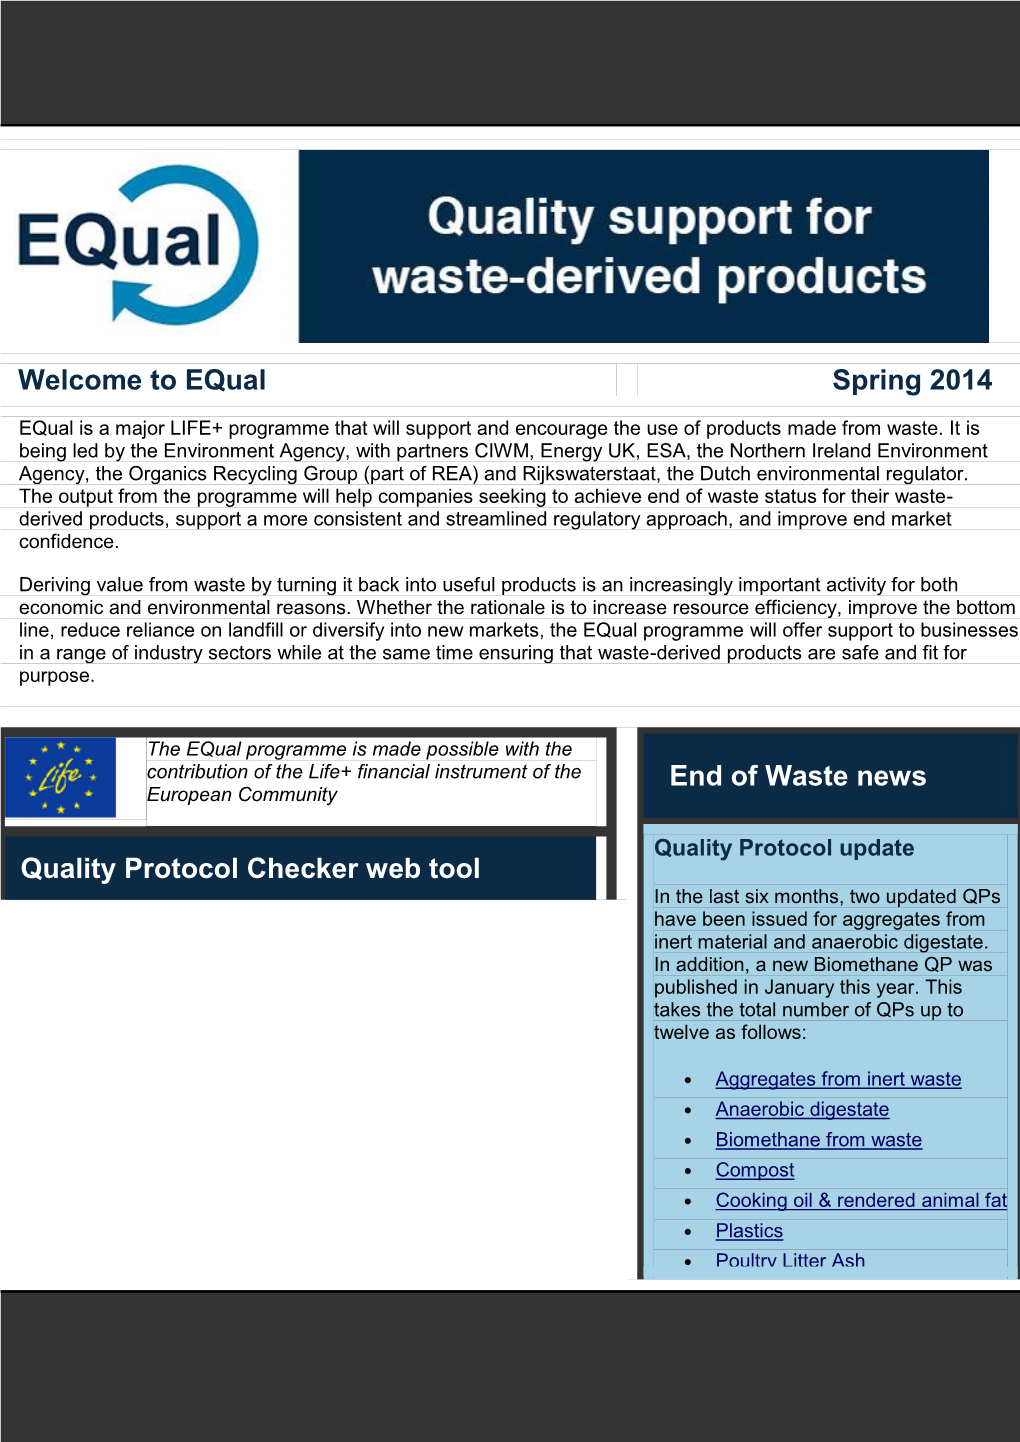 Welcome to Equal Spring 2014 Quality Protocol Checker Web Tool End of Waste News